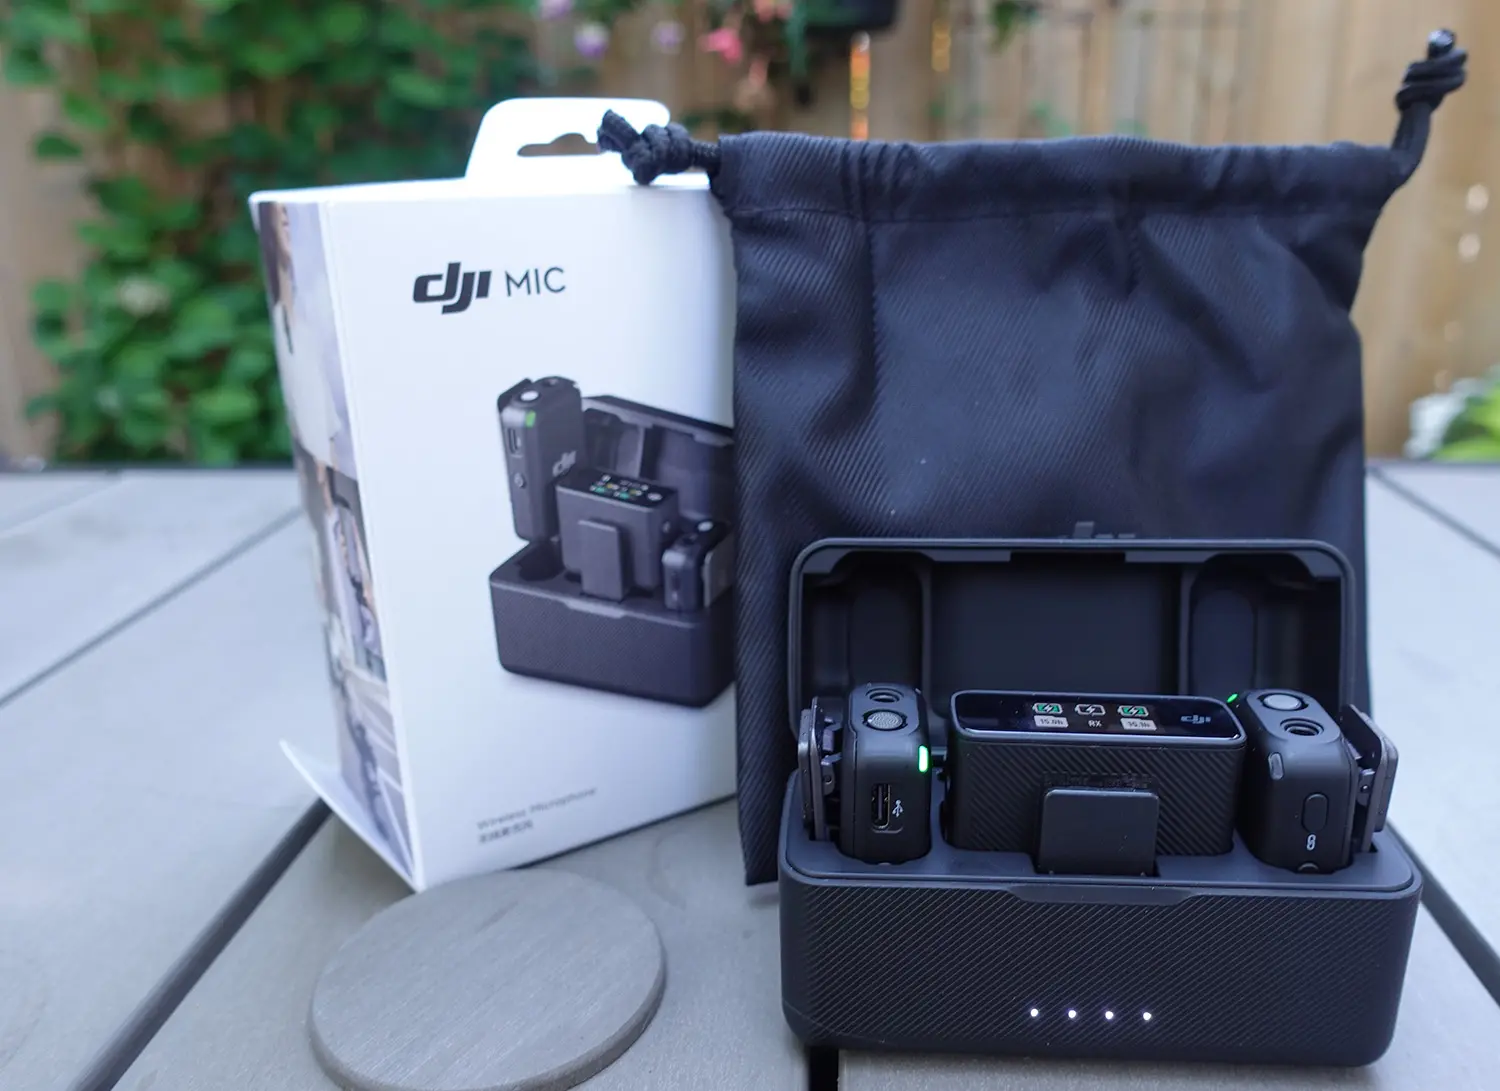 We Review the DJI Mic: The Best Portable Microphone for Your Video